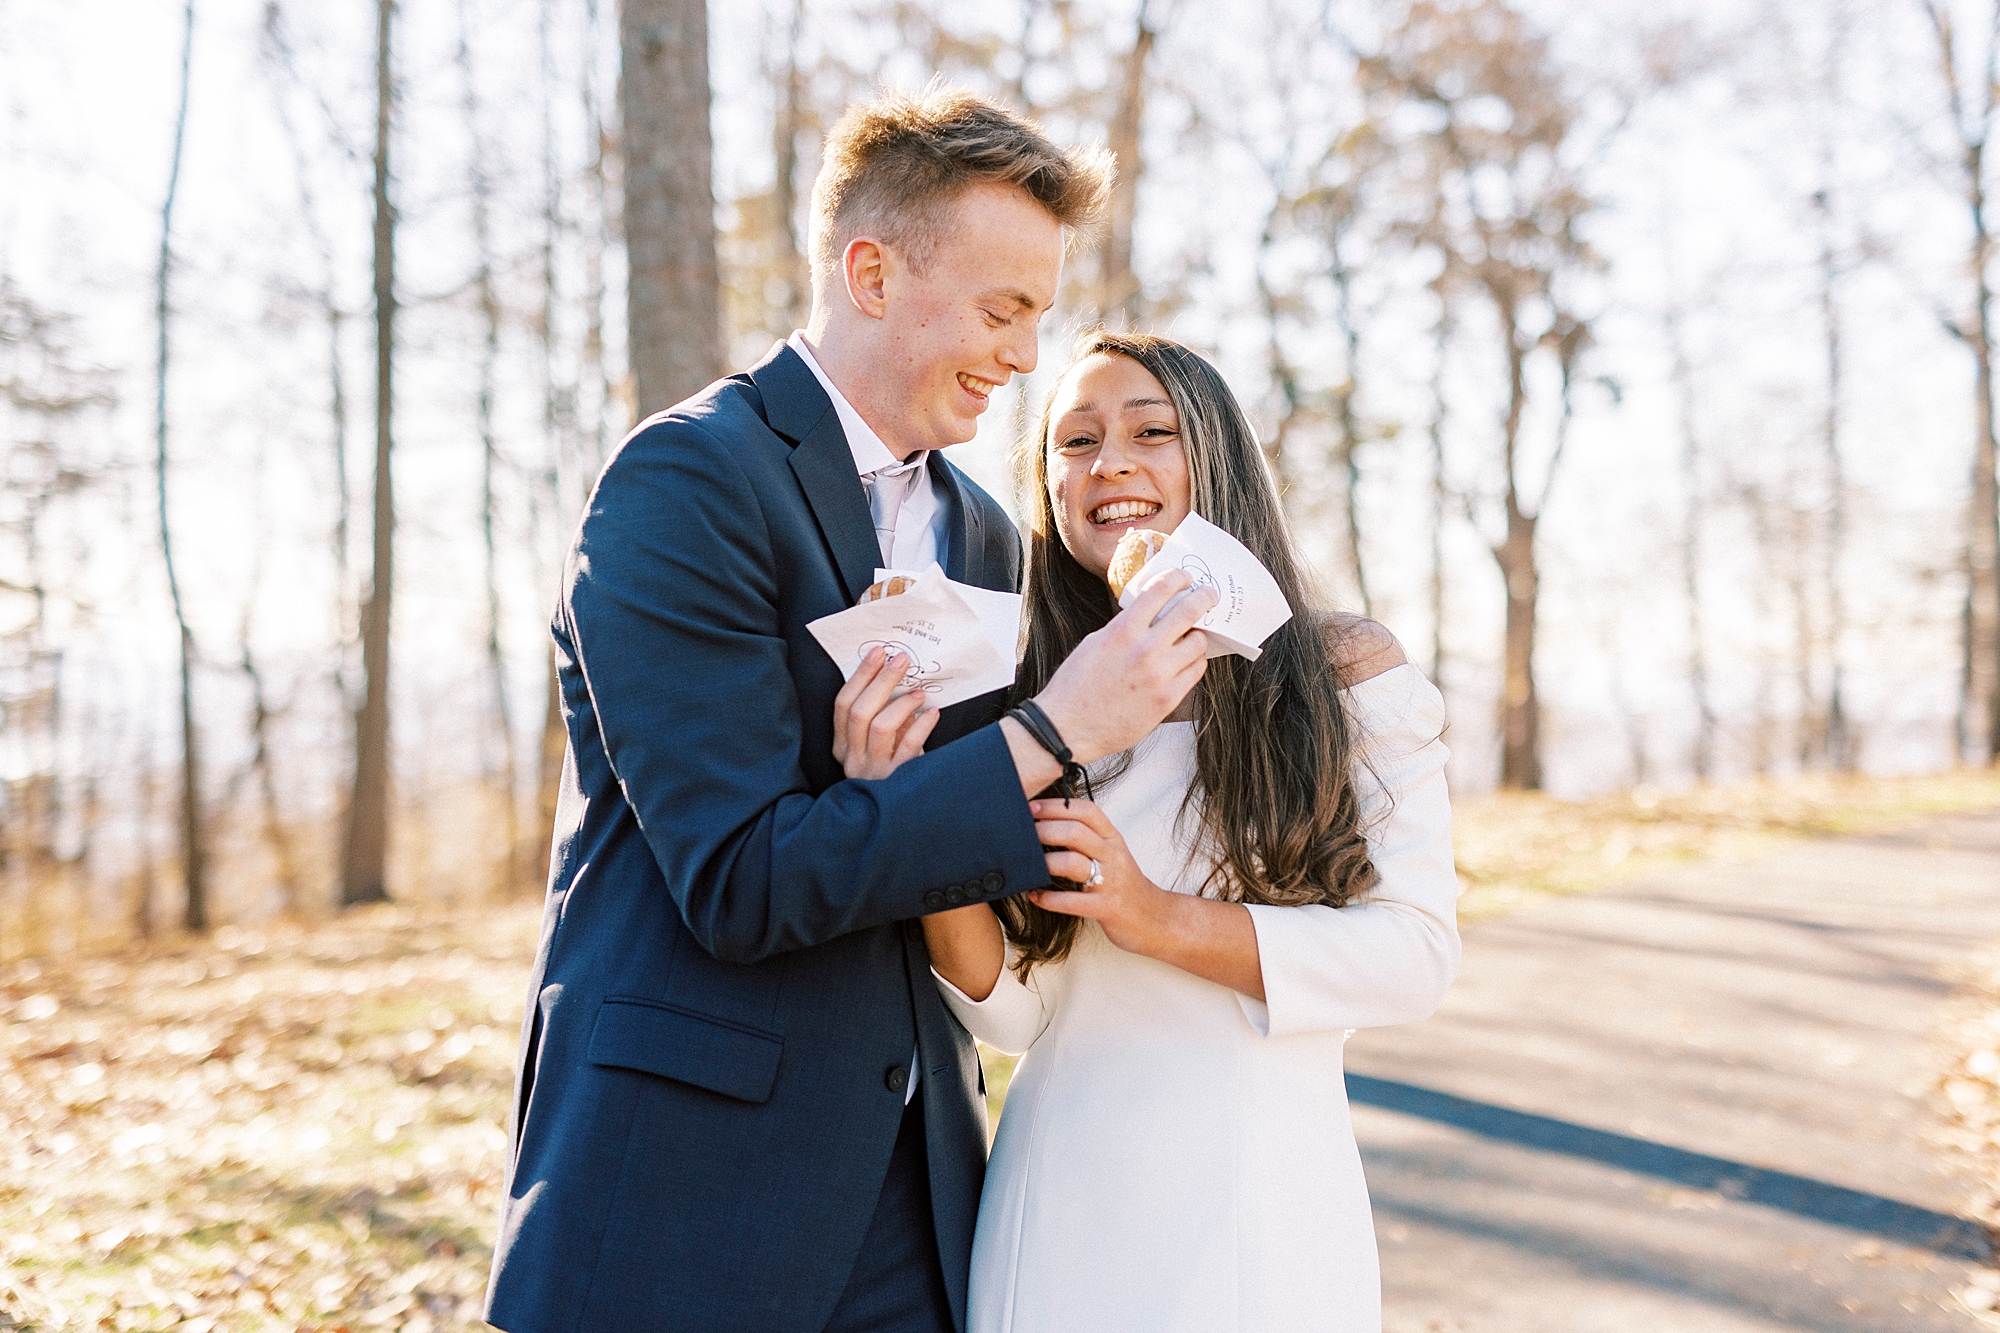 bride and groom twist arms to feed donuts to each other 